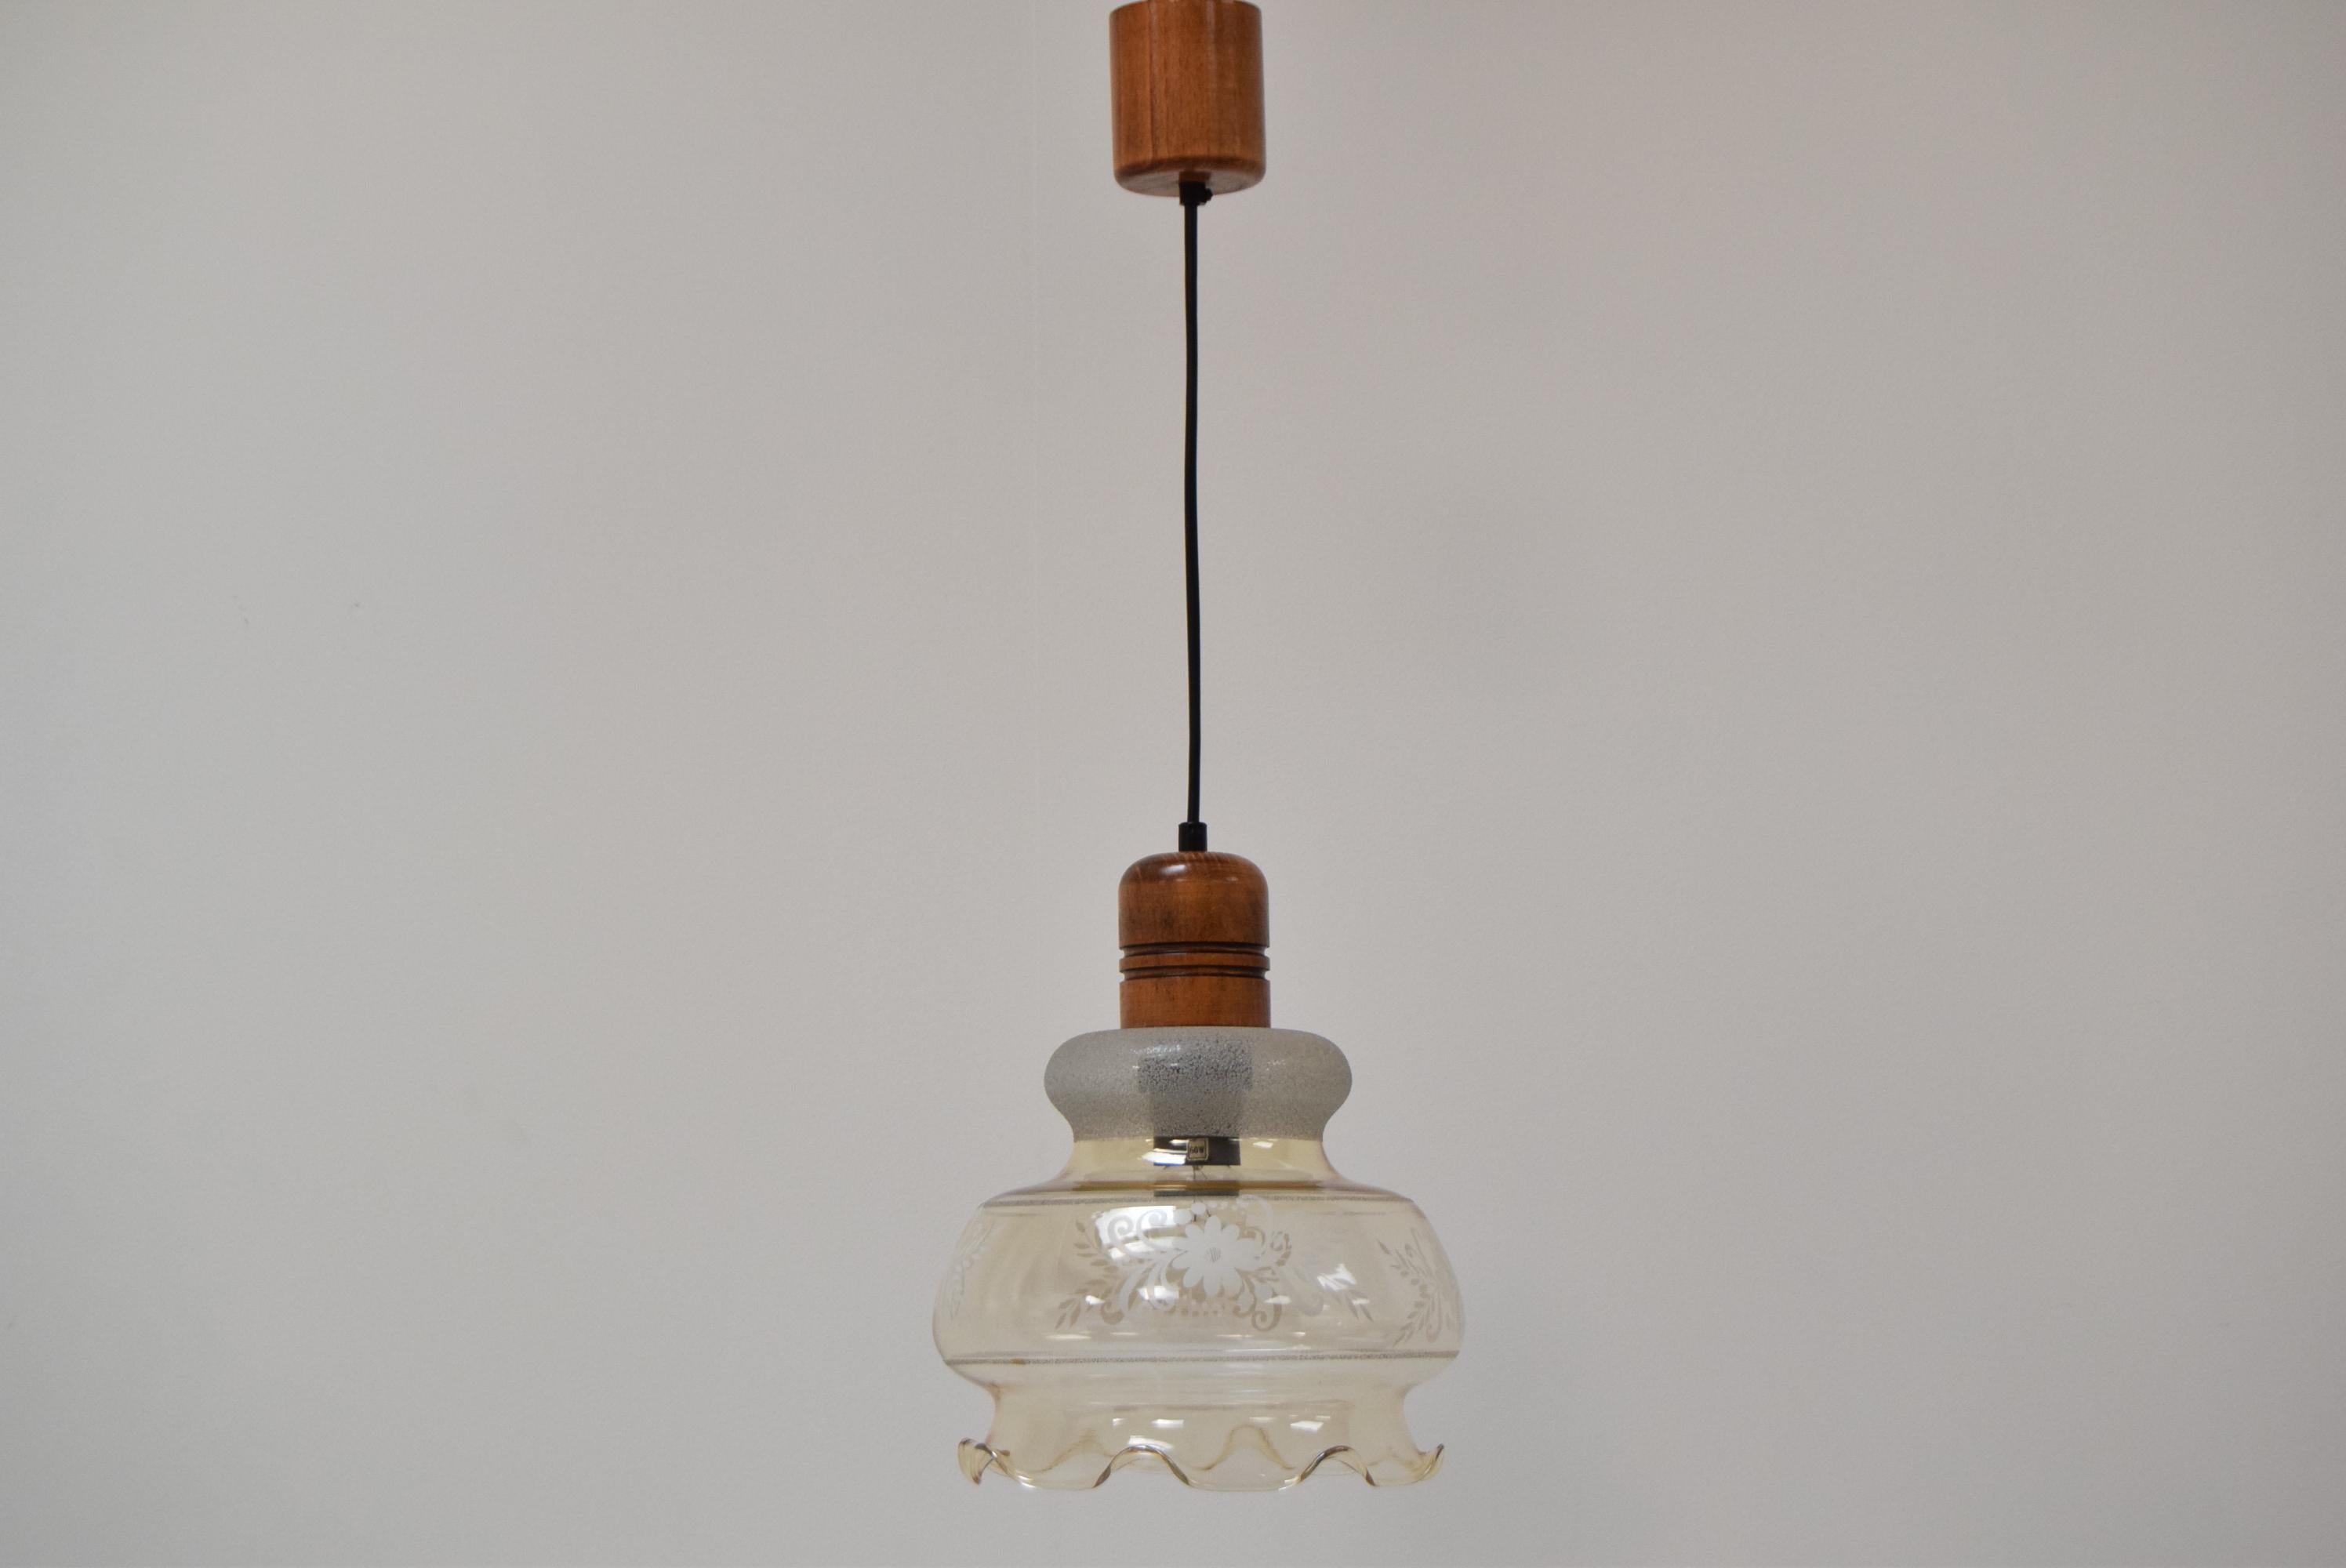 Made in Czechoslovakia
Made of Glass,Wood
1x E27 or E26 bulb
Re-polished
Original condition
US wiring compatible.